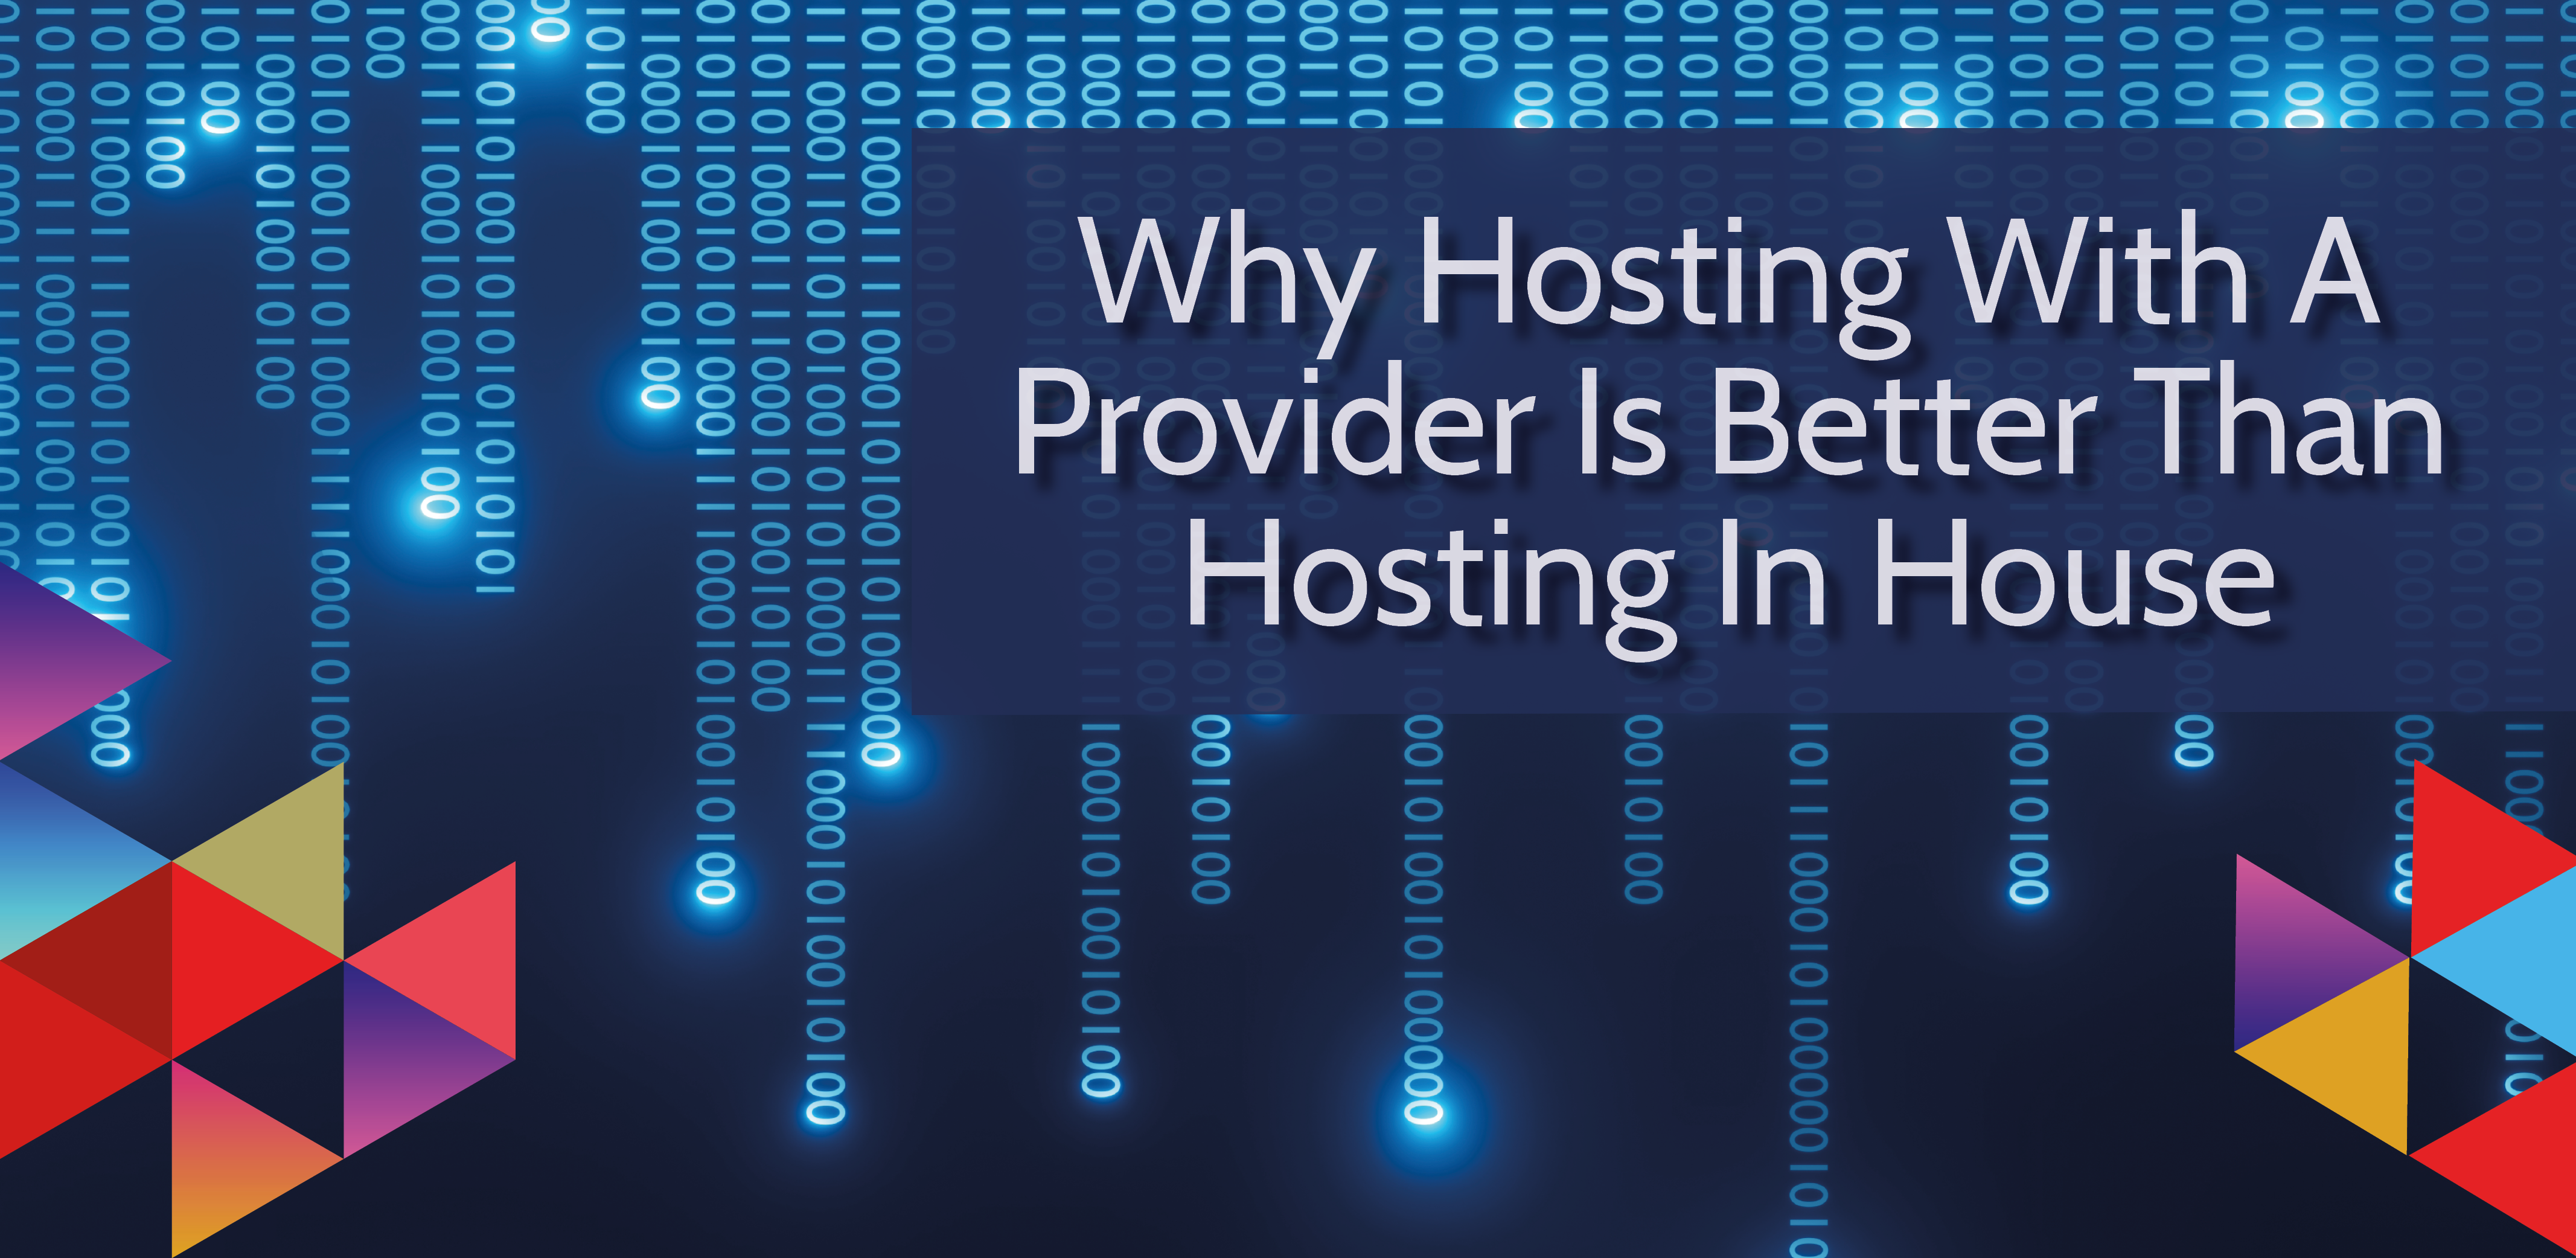 why hosting with a provider is better than hosting in house